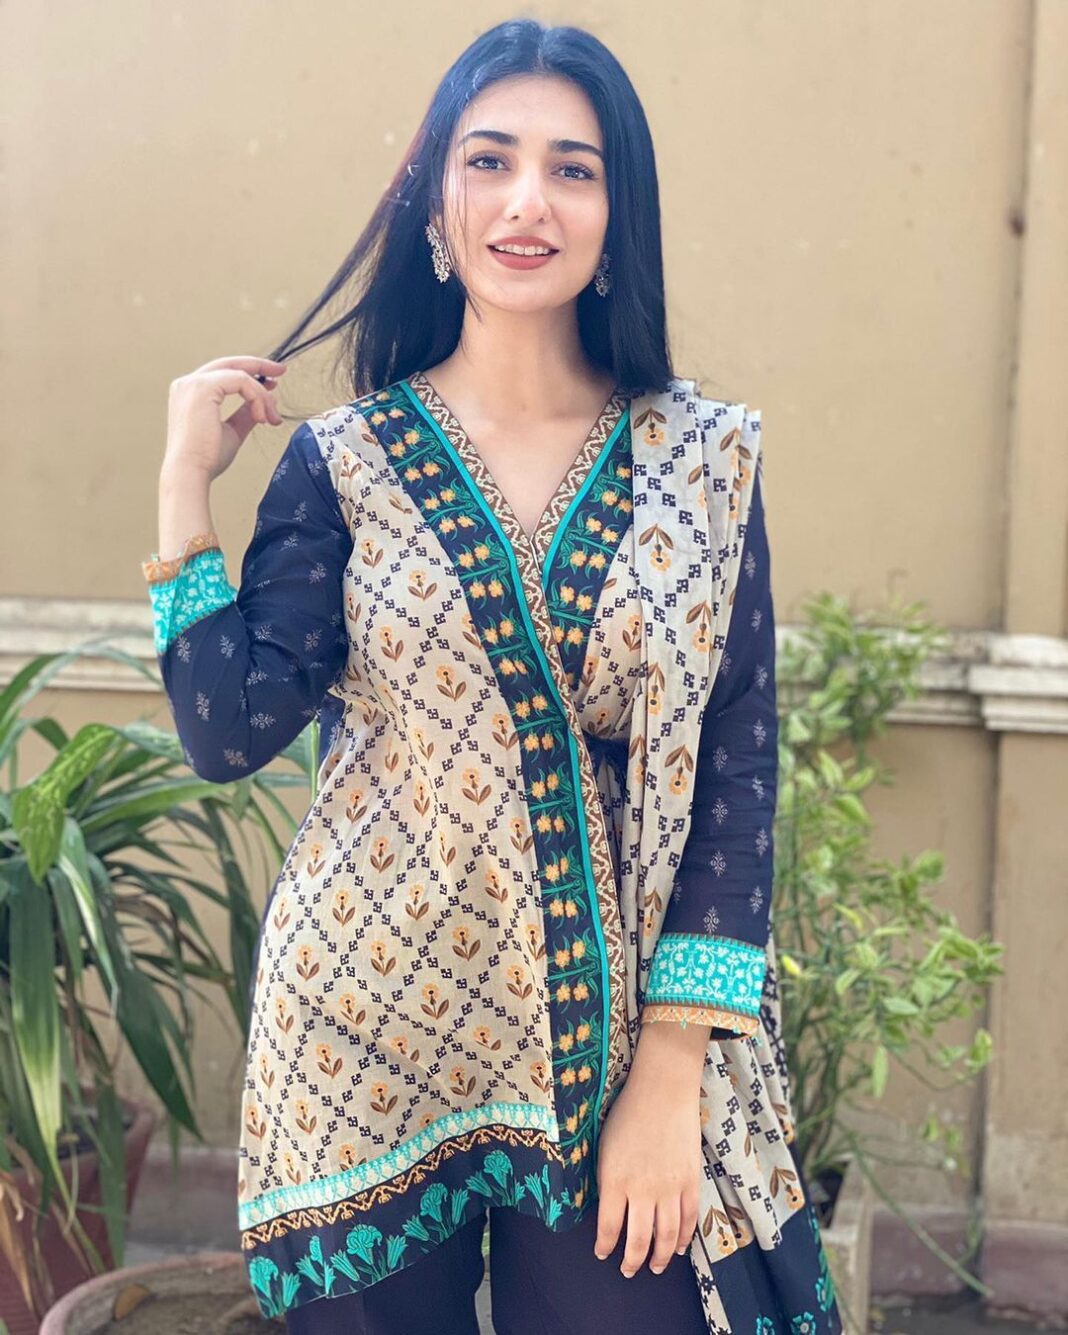 Sarah Khan Instagram - Its lawn season and I know all of you have been waiting for something awesome that is also very affordable - the wait is over because @maahrupk just launched their Spring Summer Unstitched Lawn collection!! *Go online to Maahru.pk* and use *my code Sara15* to get 15% off! when you checkout on your order. The entire collection is perfect for summers with great quality fabric and fun color starting only at PKR 1,550! Maahru is also offering free delivery on all dresses plus *14 days* return policy, no questions asked!! Don't forget to use my code to get discount on your favorite designs! #MeraAndaz #MaahruPk